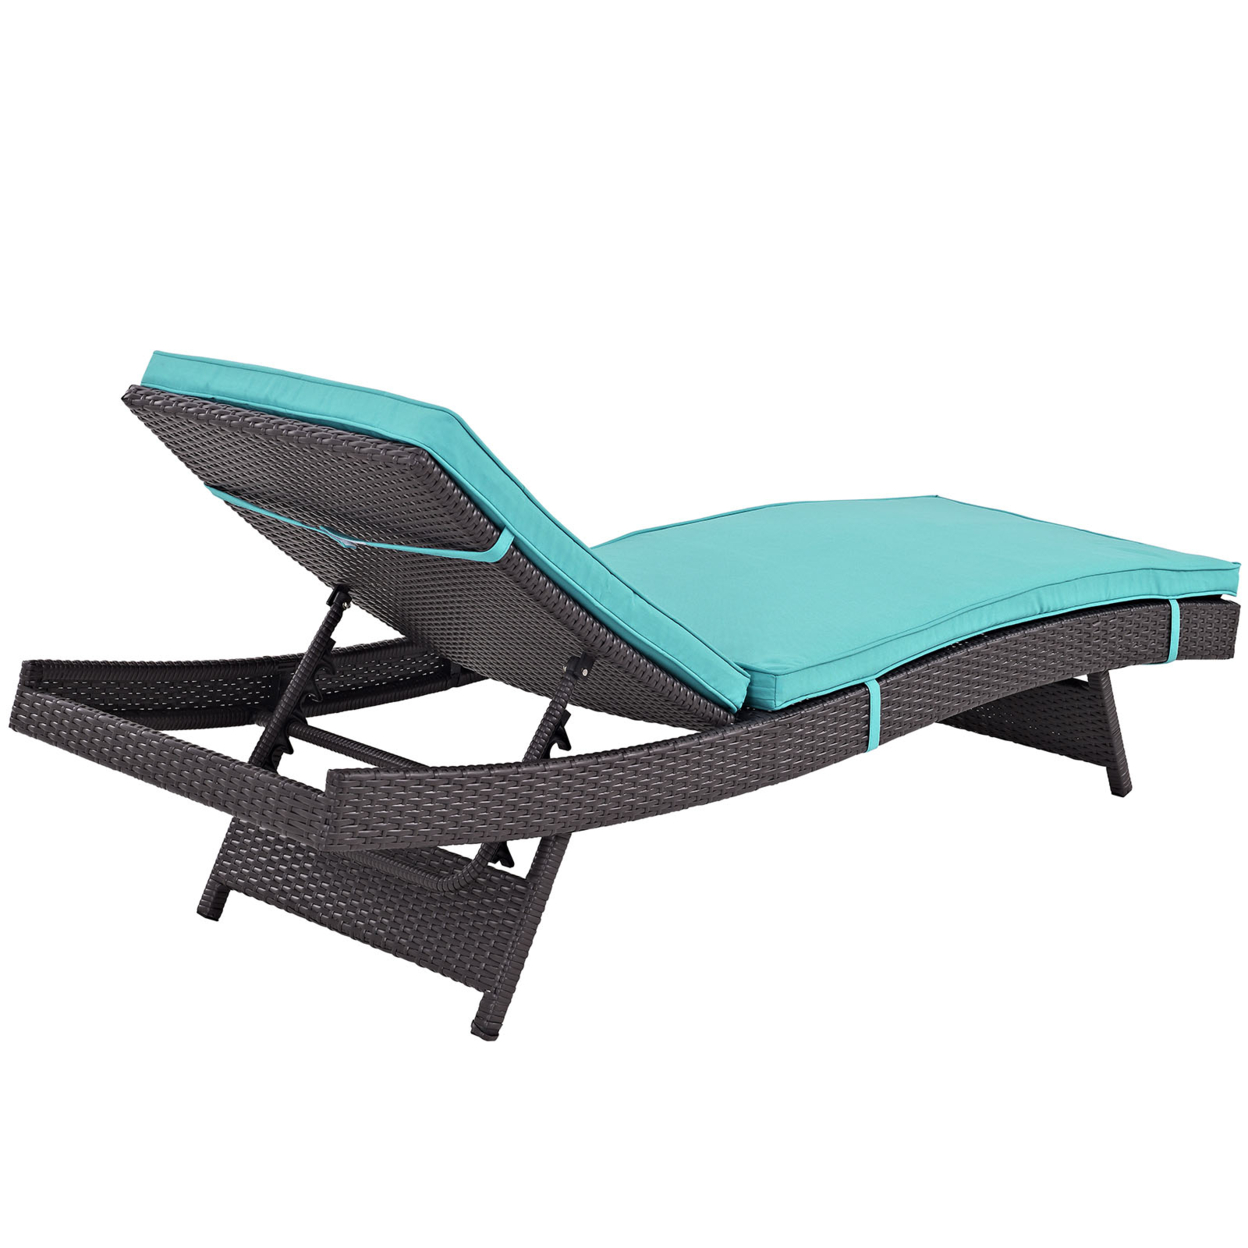 Turquoise Convene Outdoor Patio Chaise